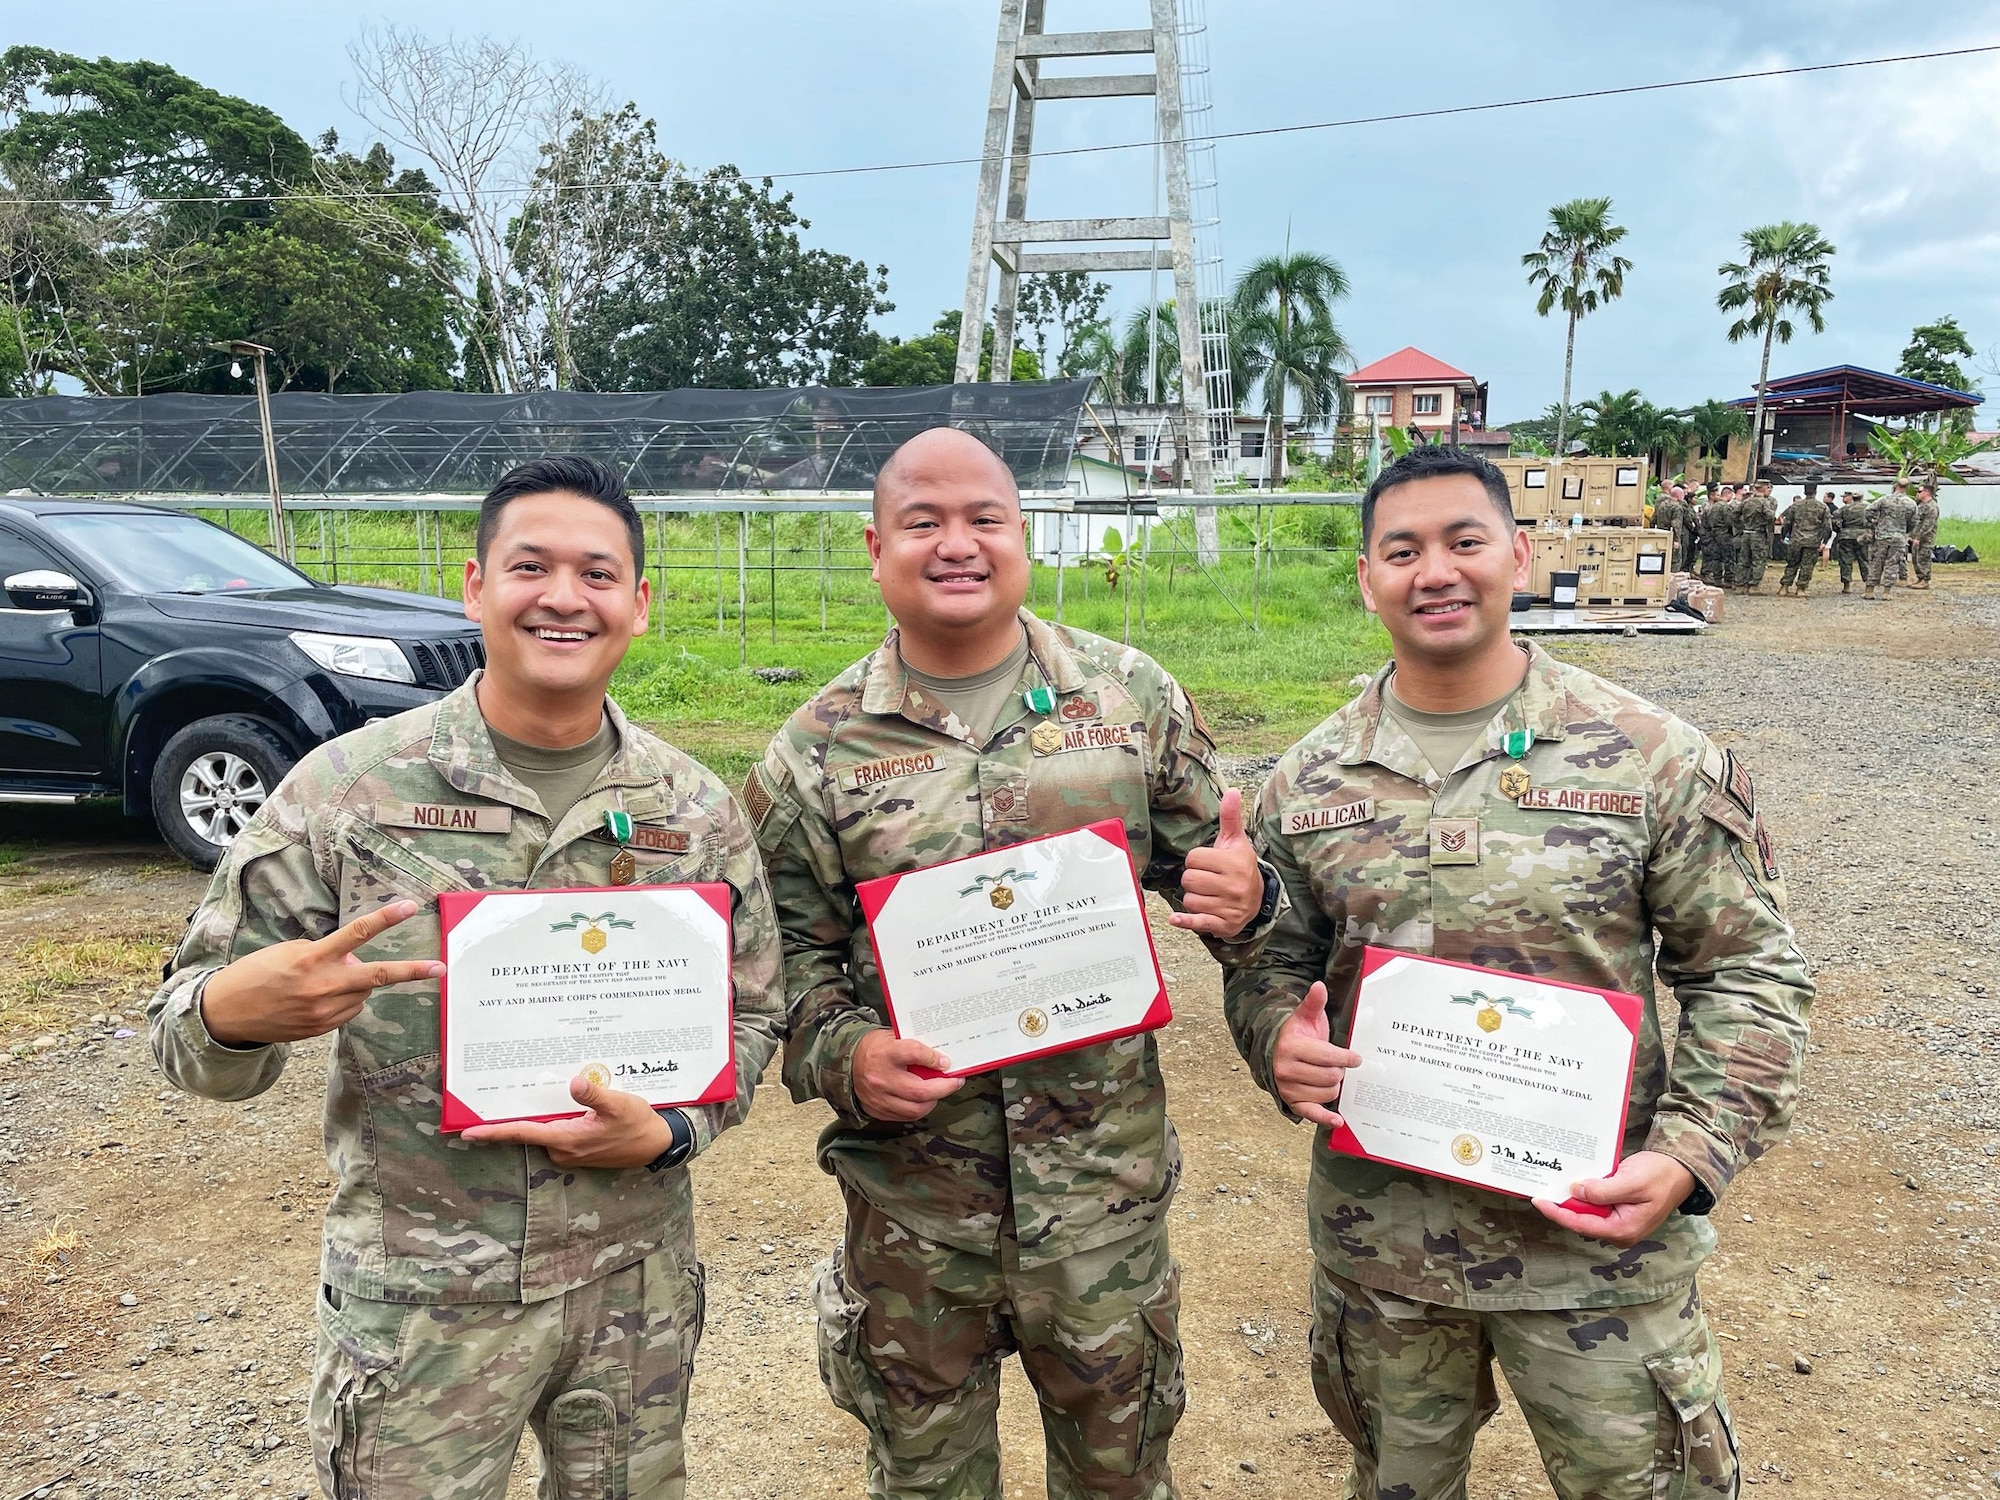 Three Airmen posing with Marine Corps Commendation Medal Certificates